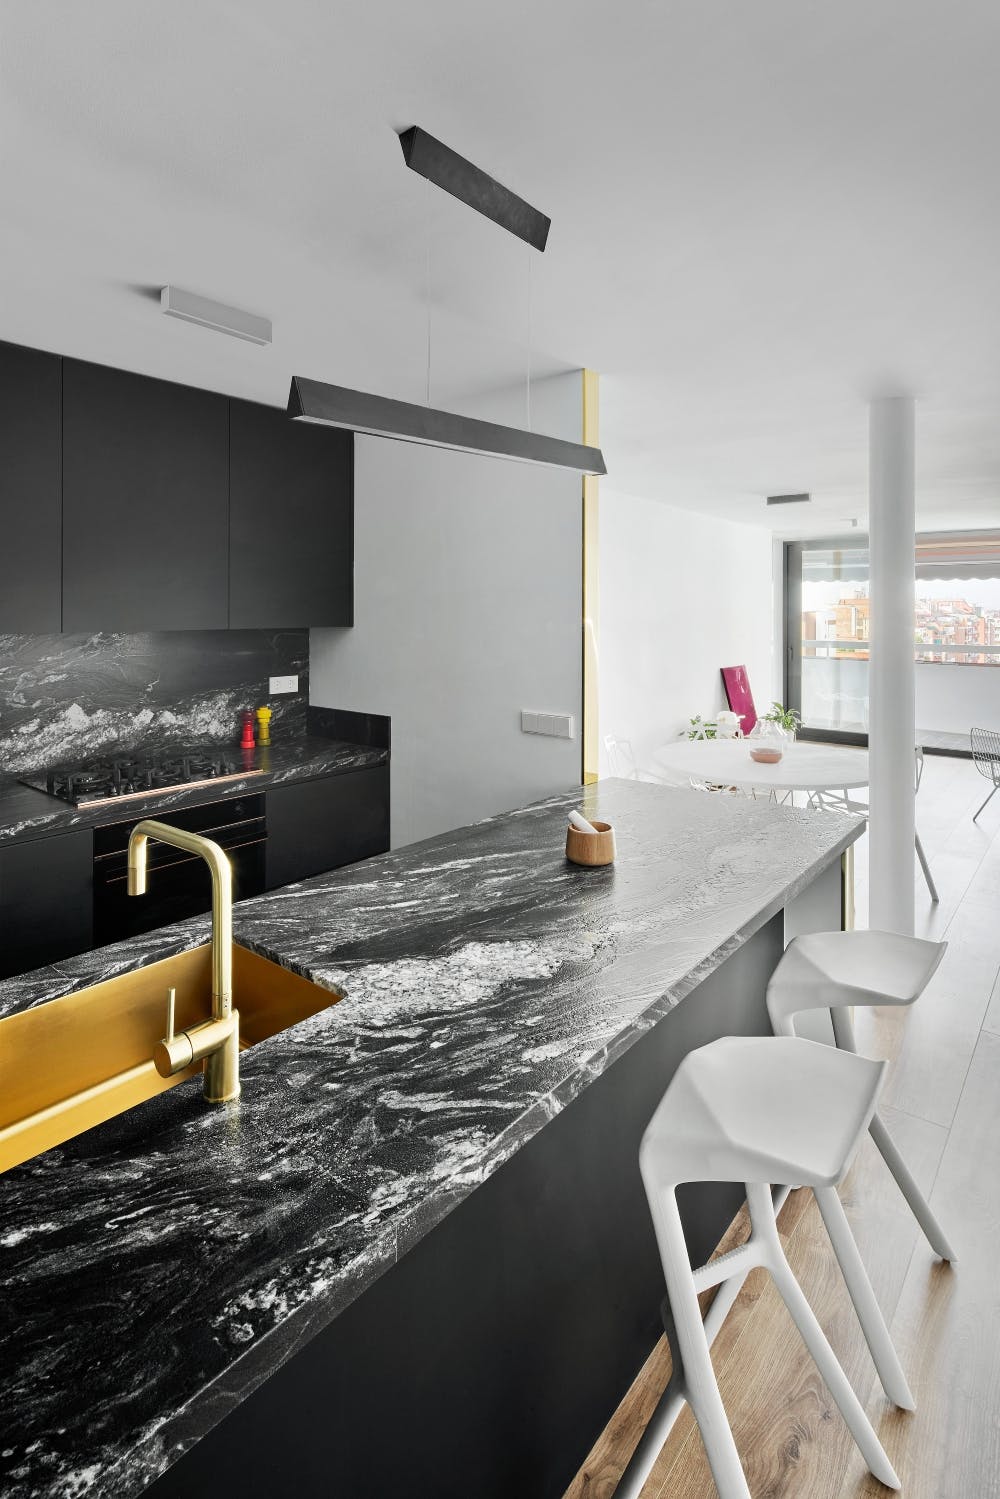 Image of 2art 1 in Connected spaces creating an open and brilliant home - Cosentino